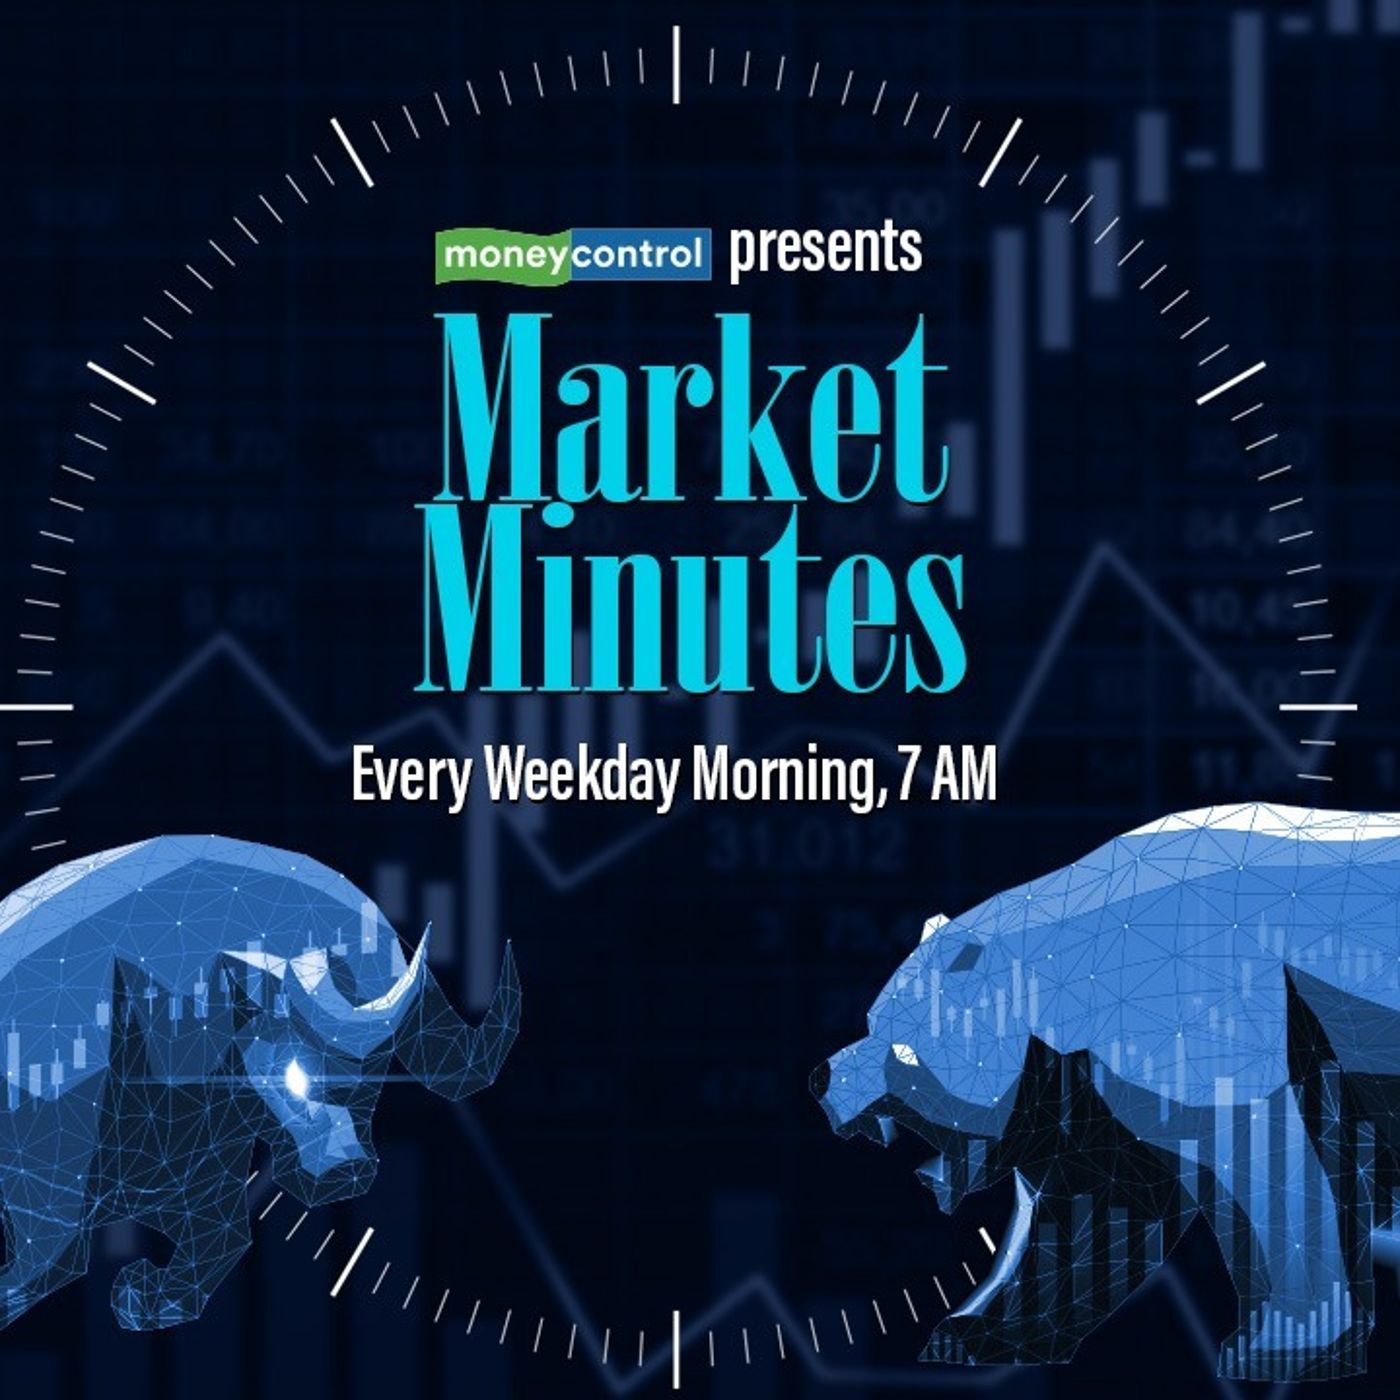 4198: F&O expiry, T+0 settlement cycle, macro data among factors to guide markets this week | Market Minutes